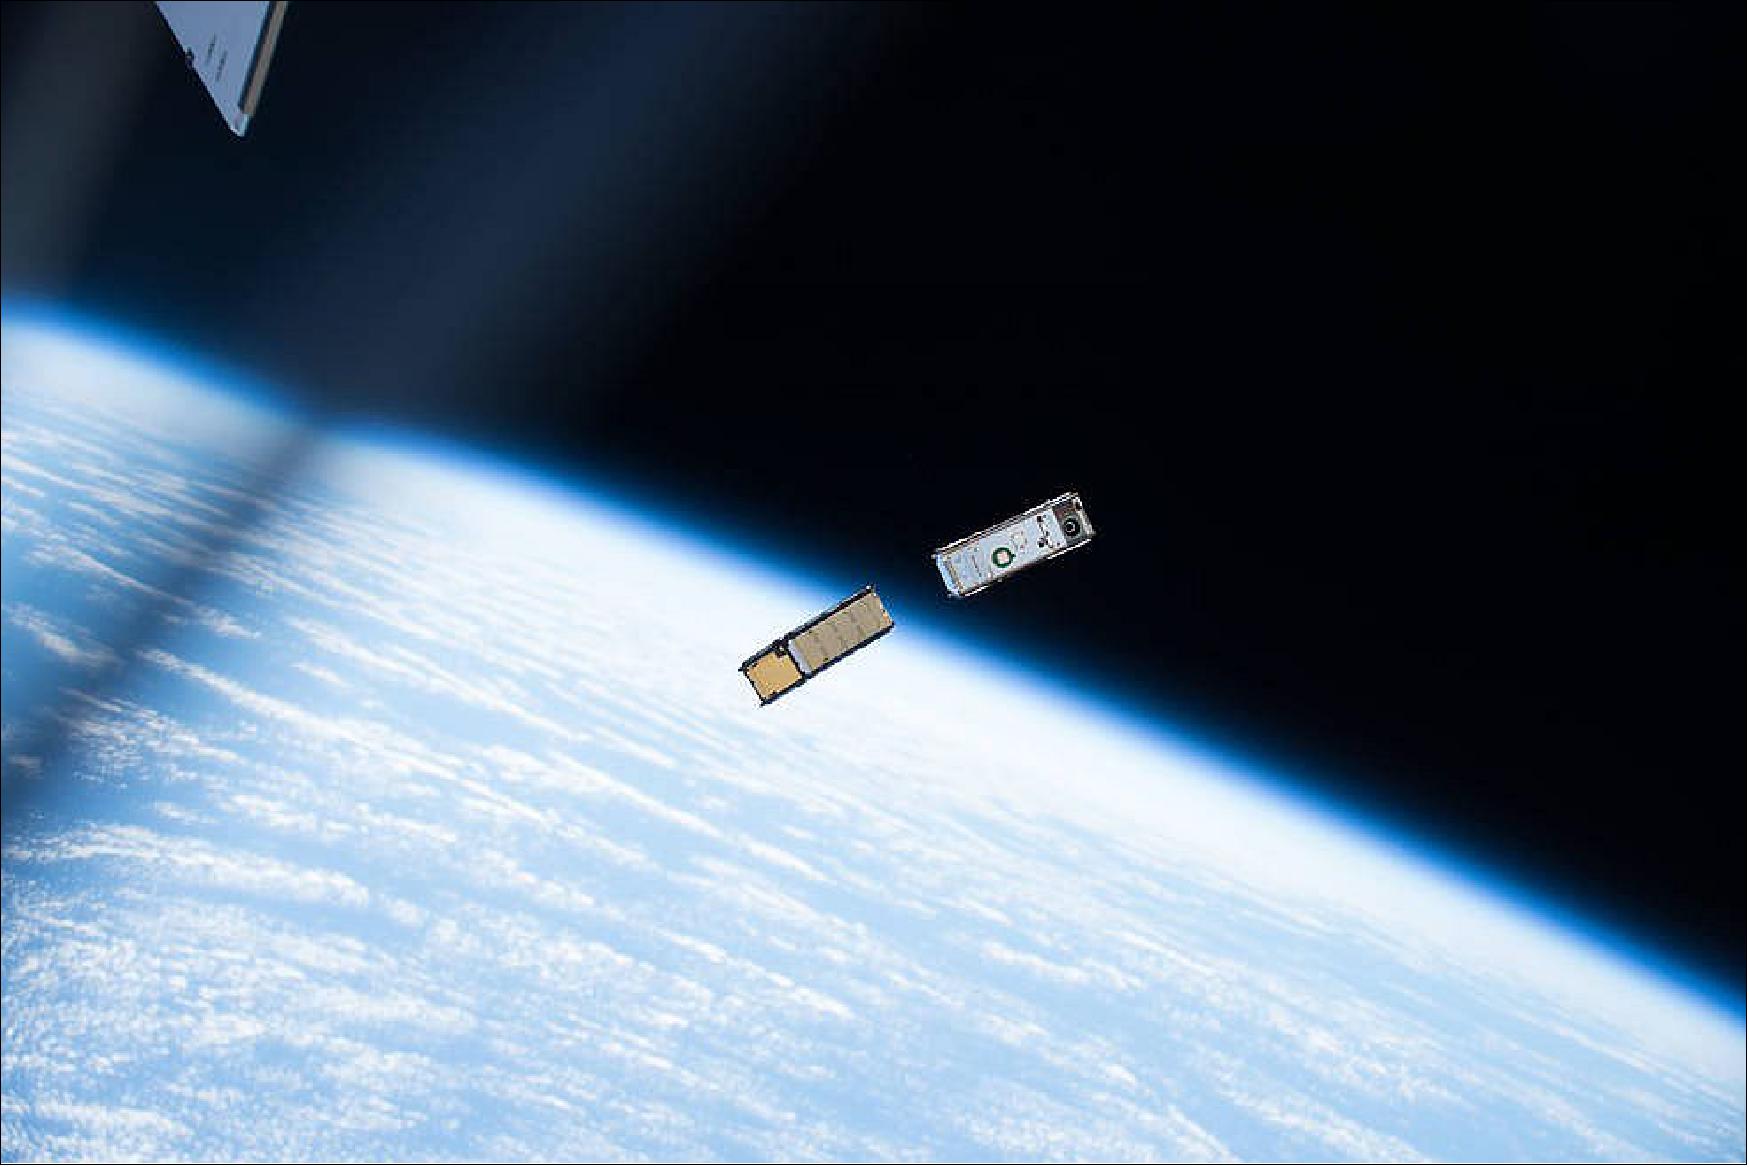 Figure 5: NASA’s Entrepreneur’s Challenge awarded 10 startup companies awards for innovative technology concepts, including those that could improve onboard systems on small satellites. Such satellites are often no larger than a loaf of bread, such as the CubeSats shown here as they were deployed from the International Space Station on May 16, 2017 (image credit: NASA)